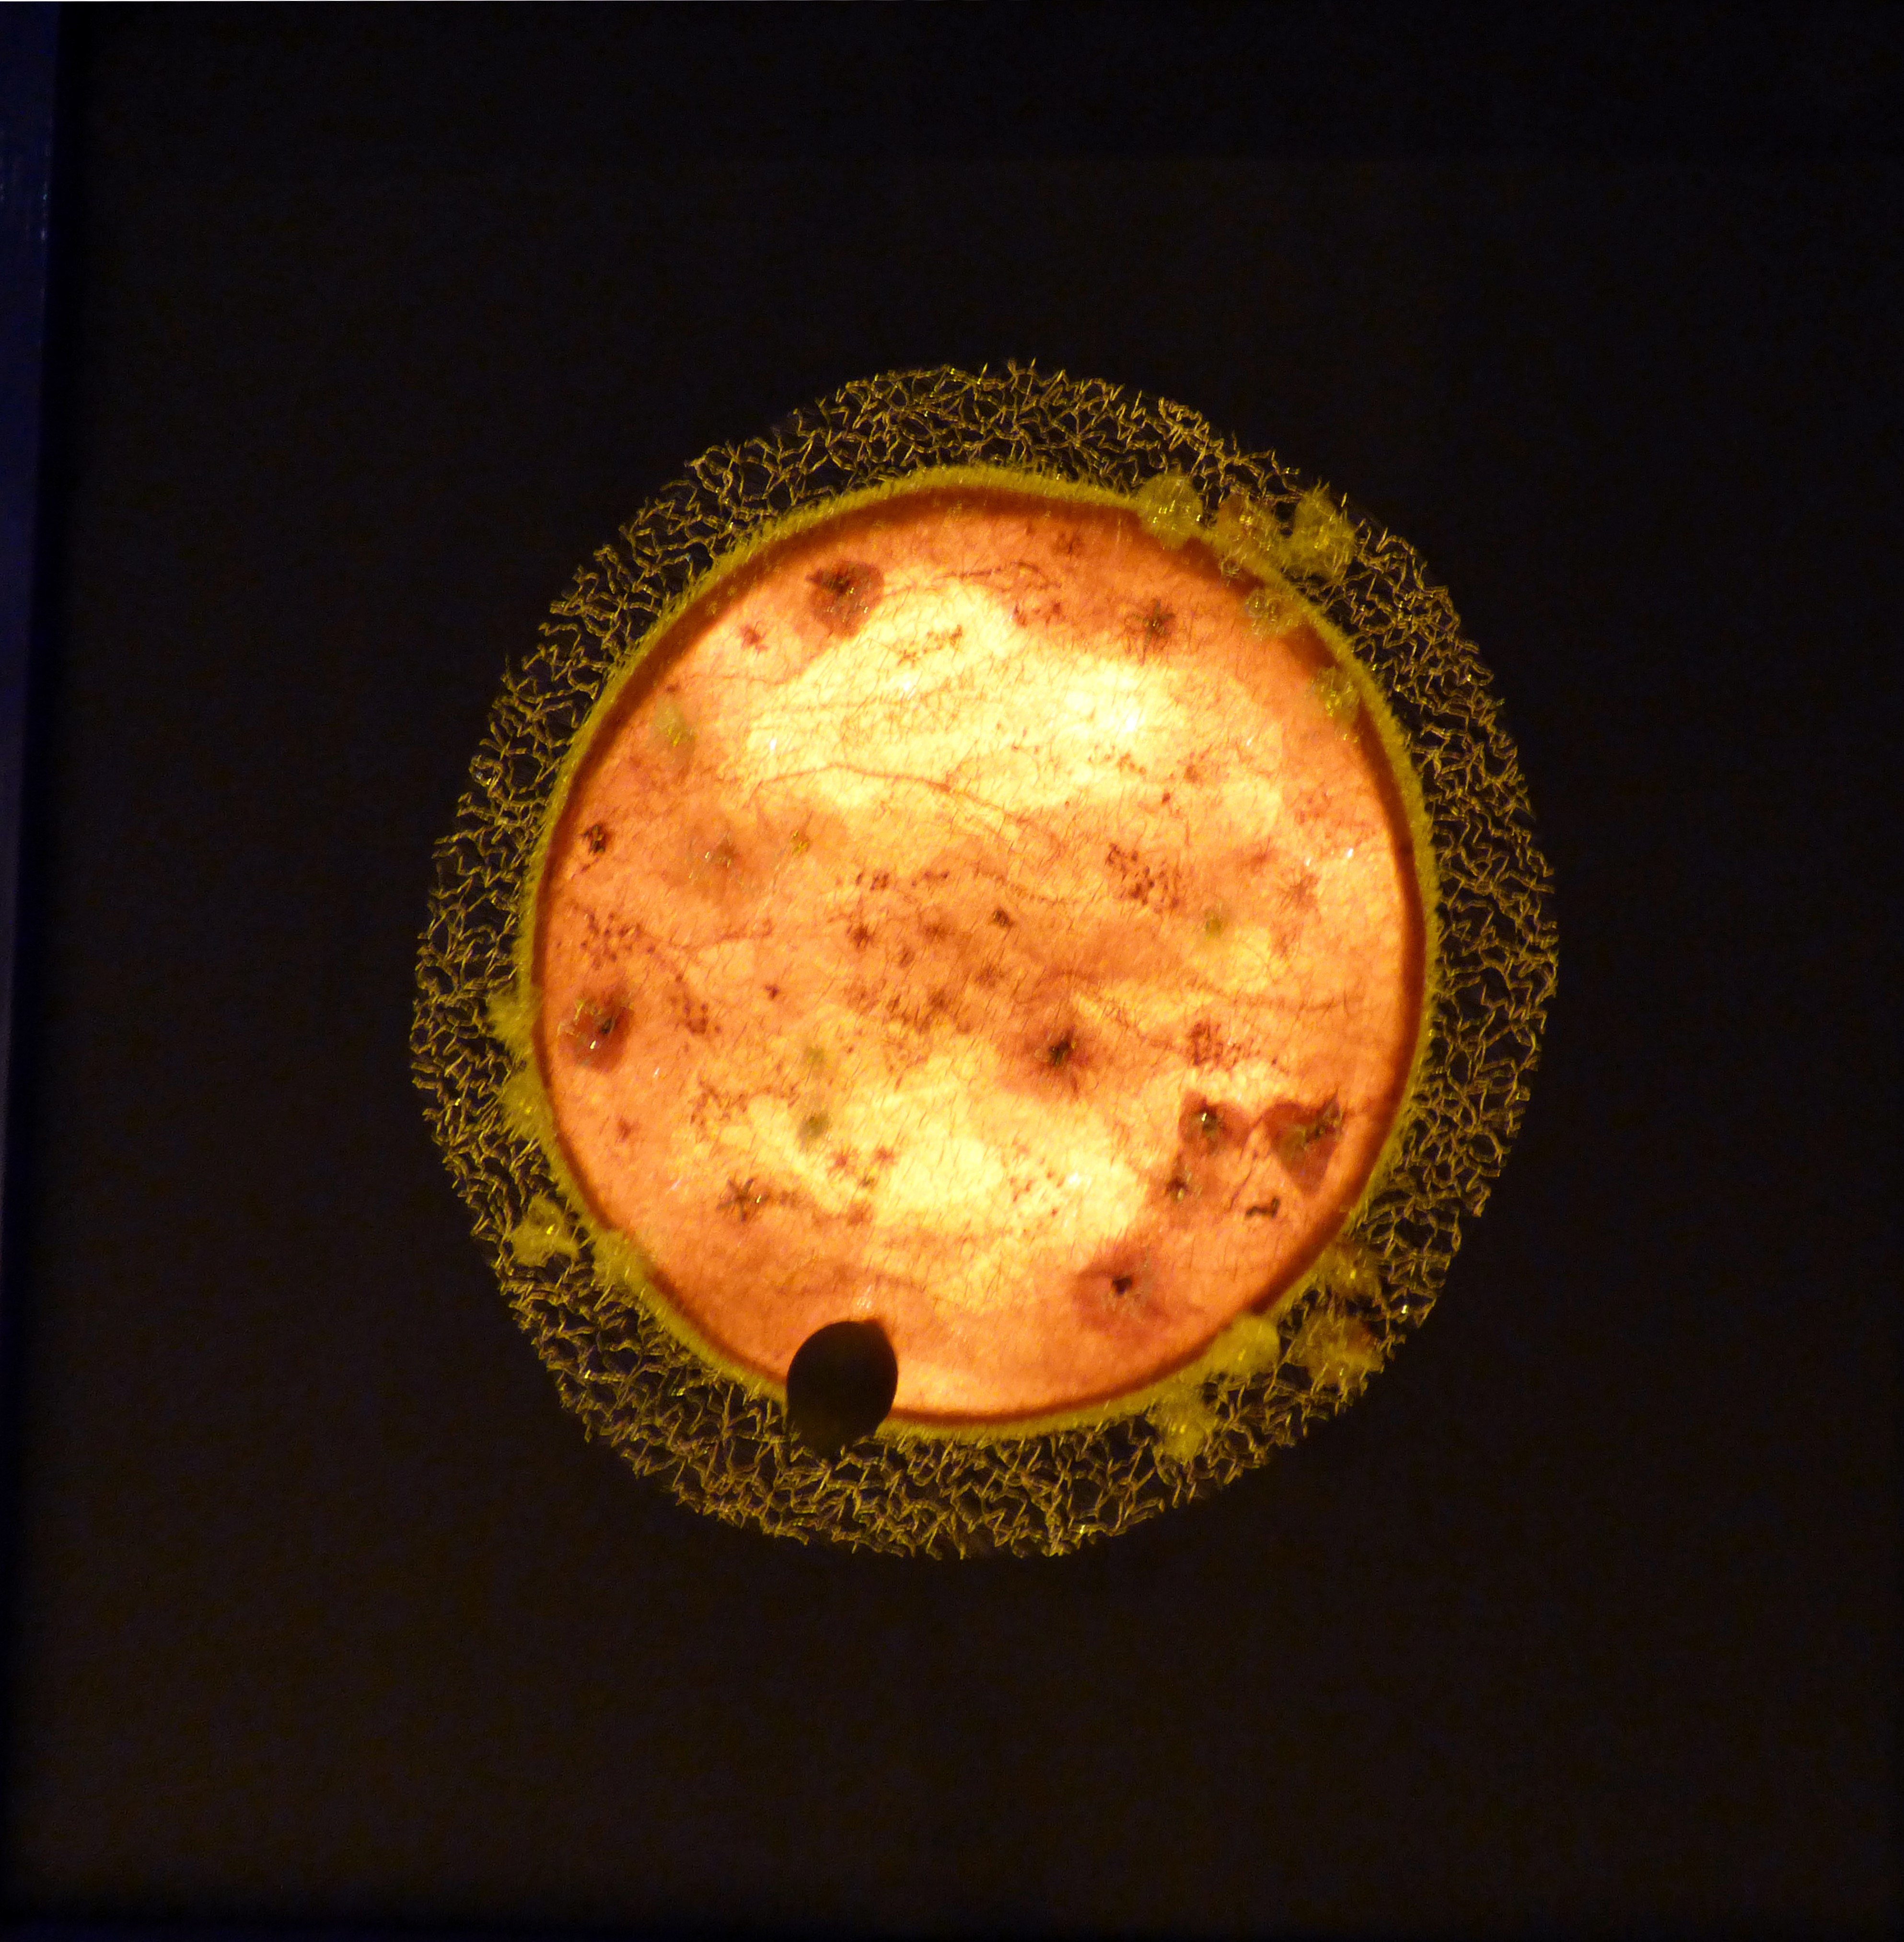 TRANSIT OF VENUS by Michele King & Mal Ralston, mixed media and hand stitch,  Endeavour exhibition, Liverpool Cathedral, Sept 2018